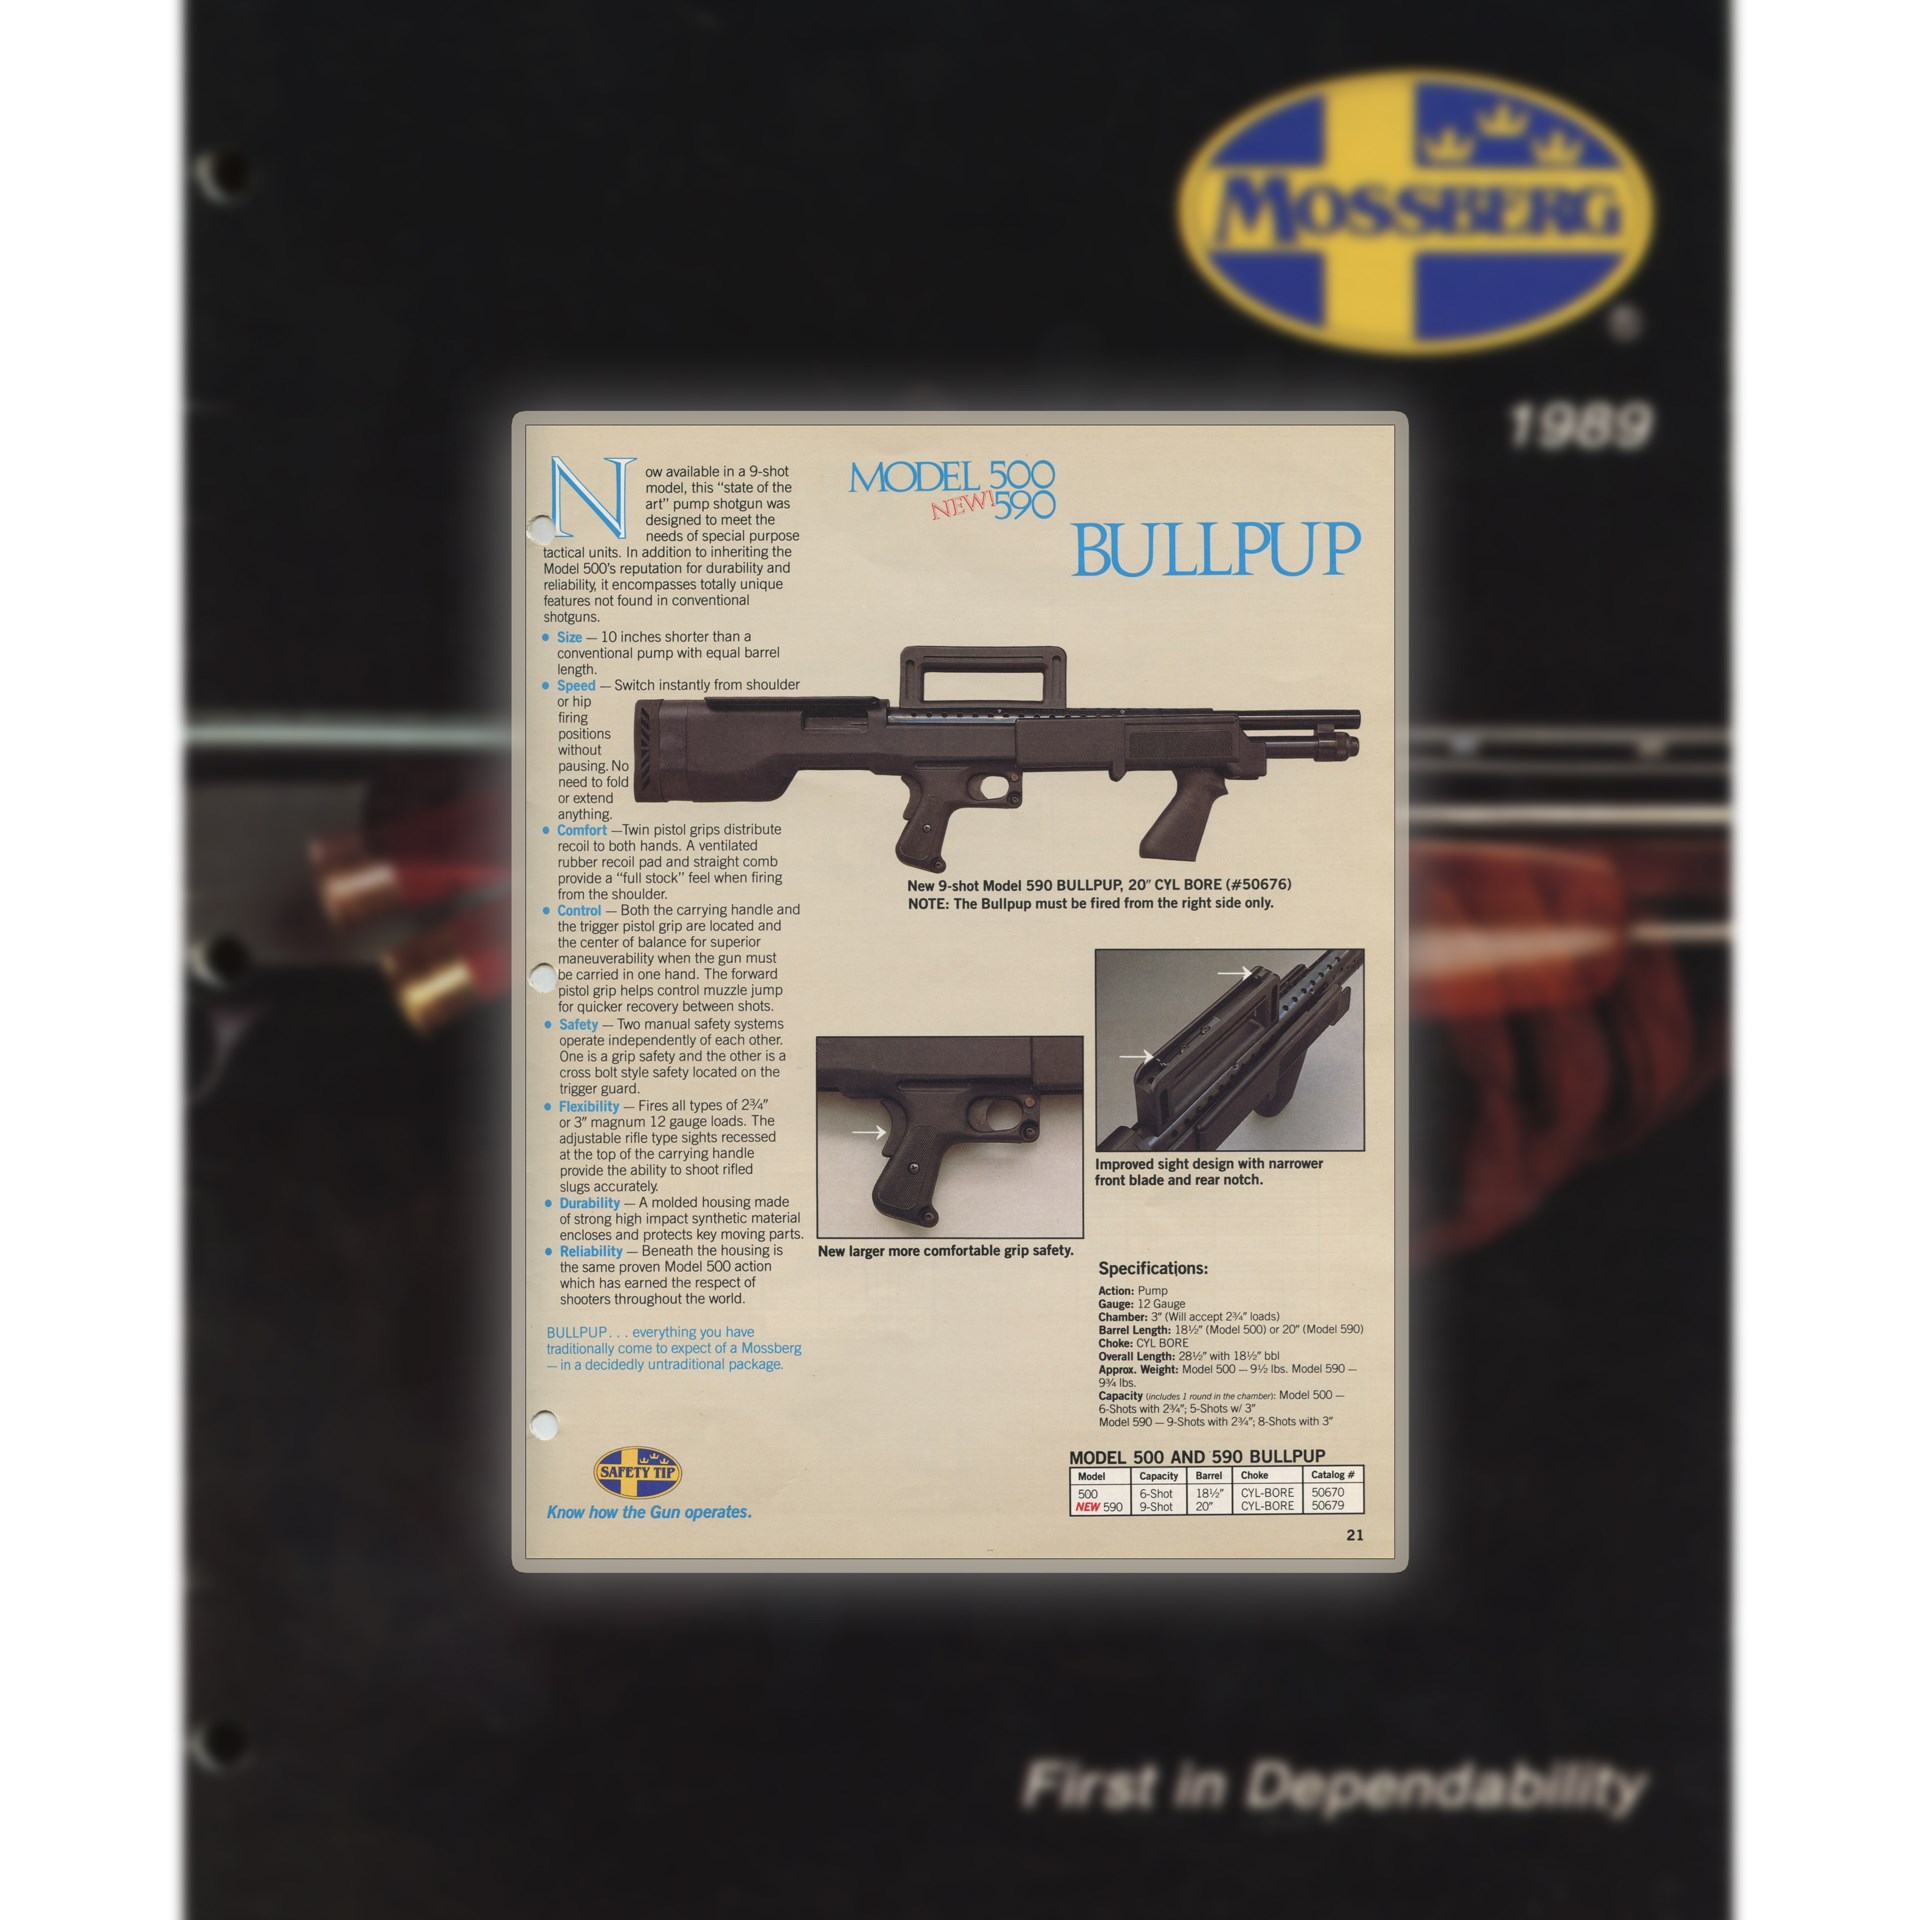 1989 Mossberg catalog cover with Model 500 and Model 590 Bullpup shotguns